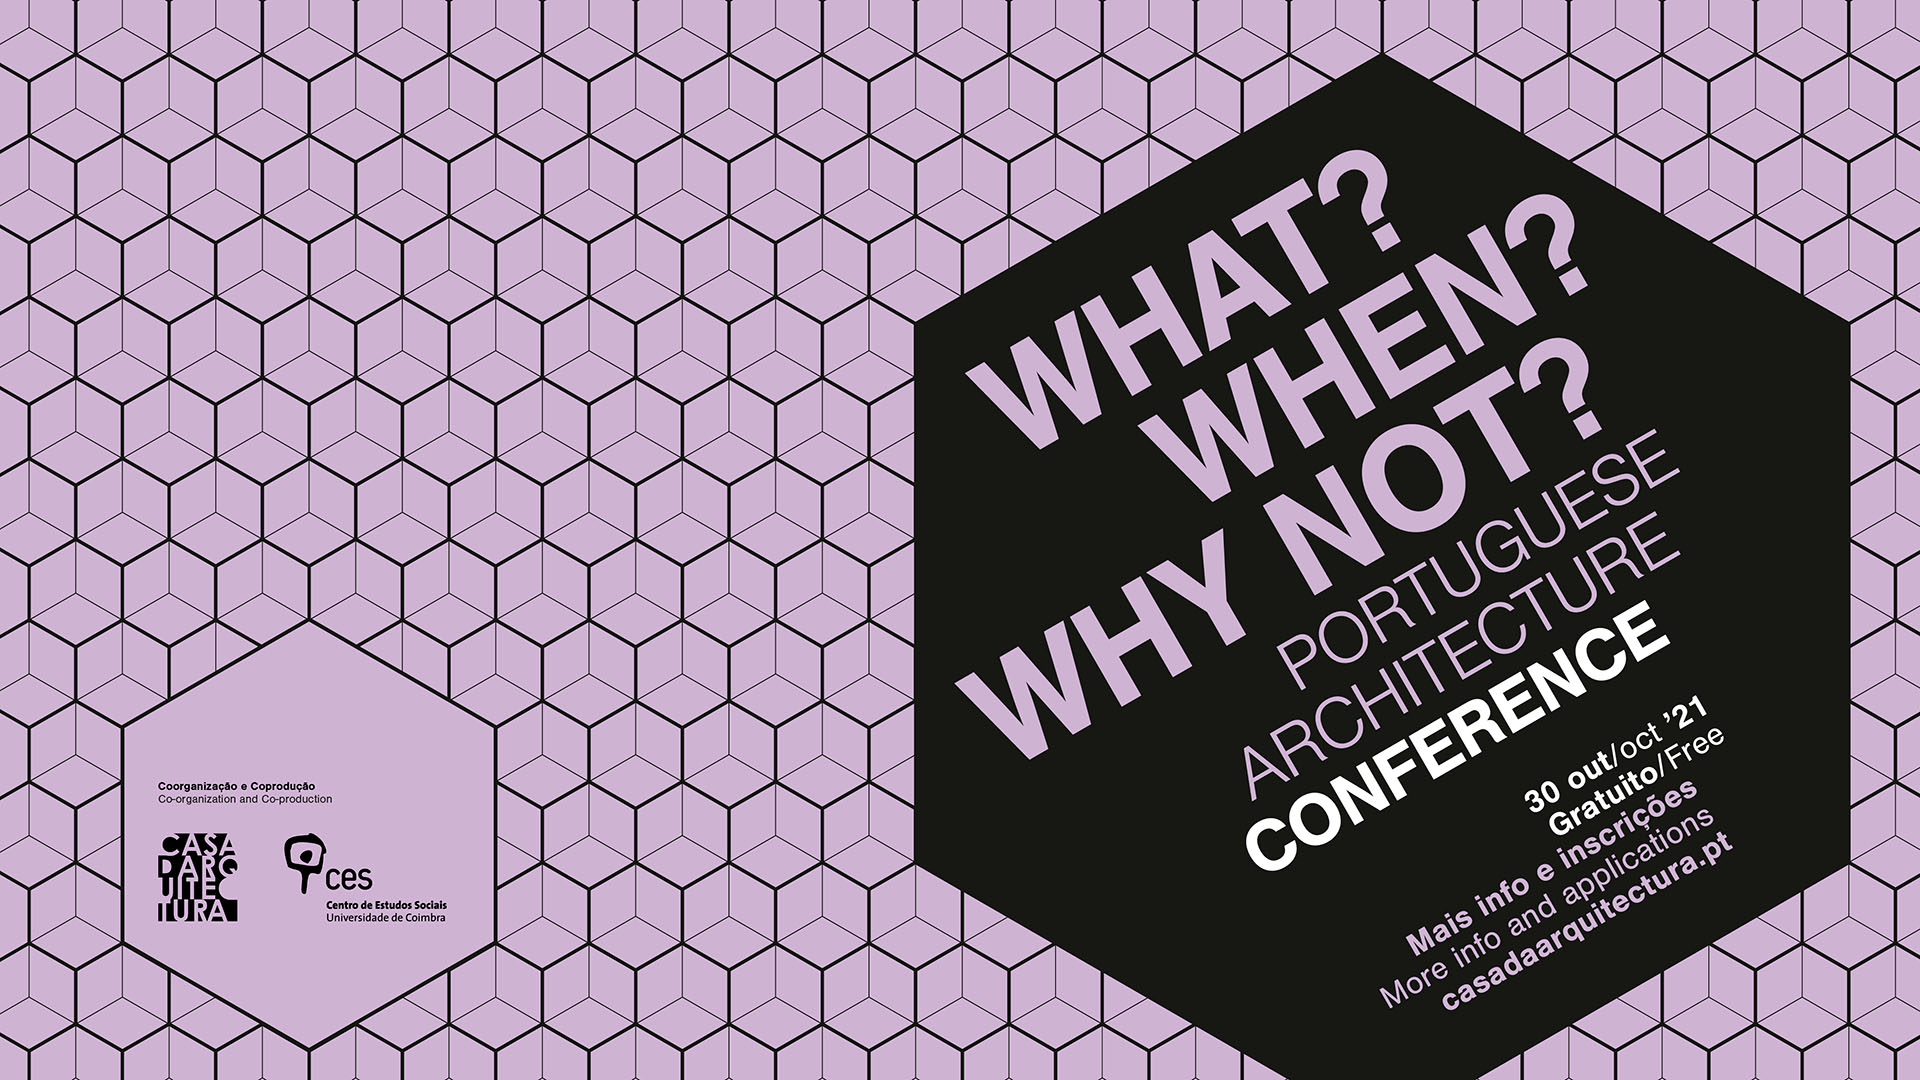 What? When? Why Not? Portuguese Architecture Colóquio Internacional/ International Conference